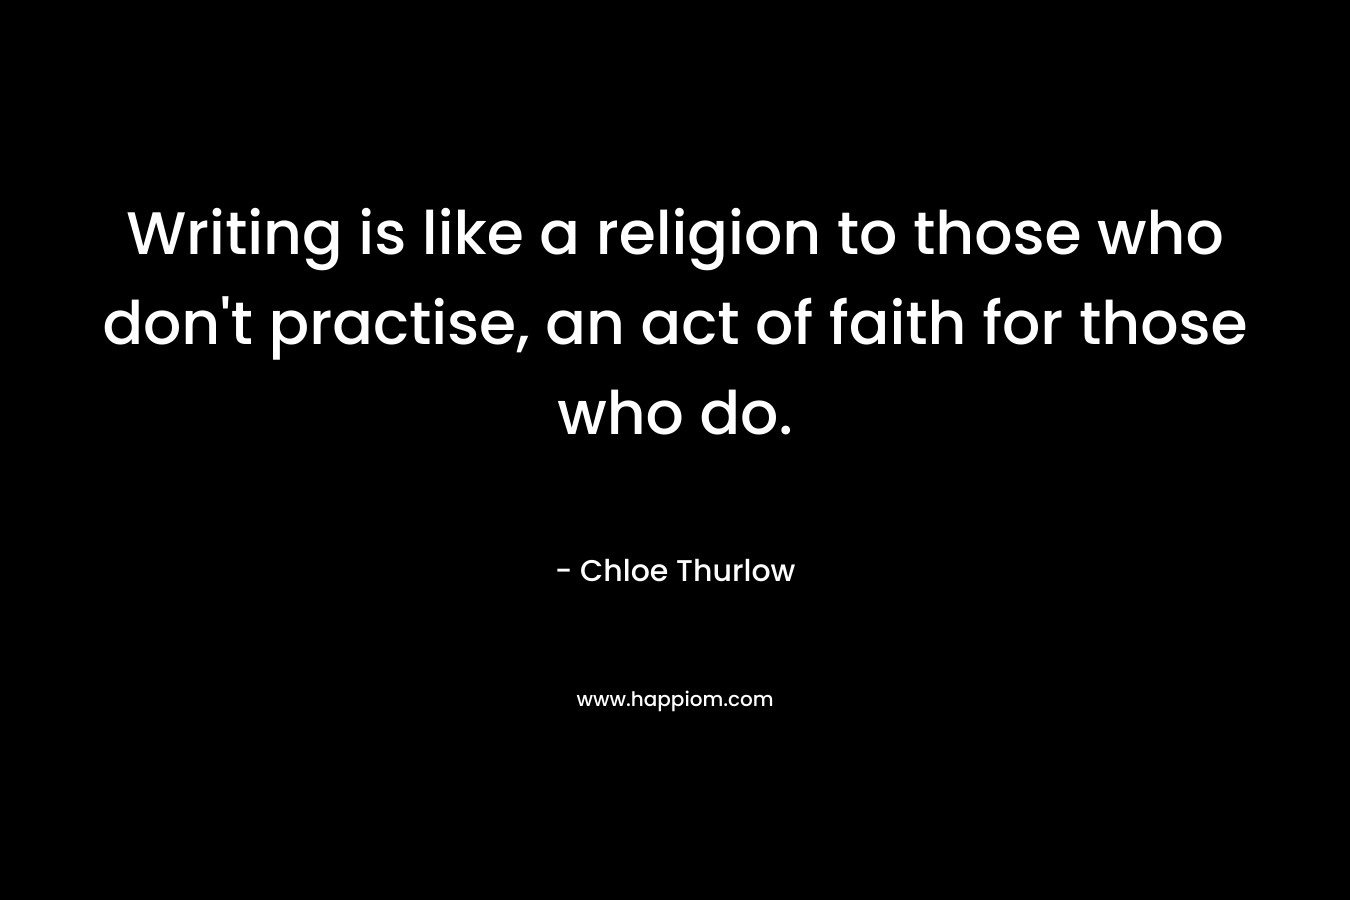 Writing is like a religion to those who don't practise, an act of faith for those who do.